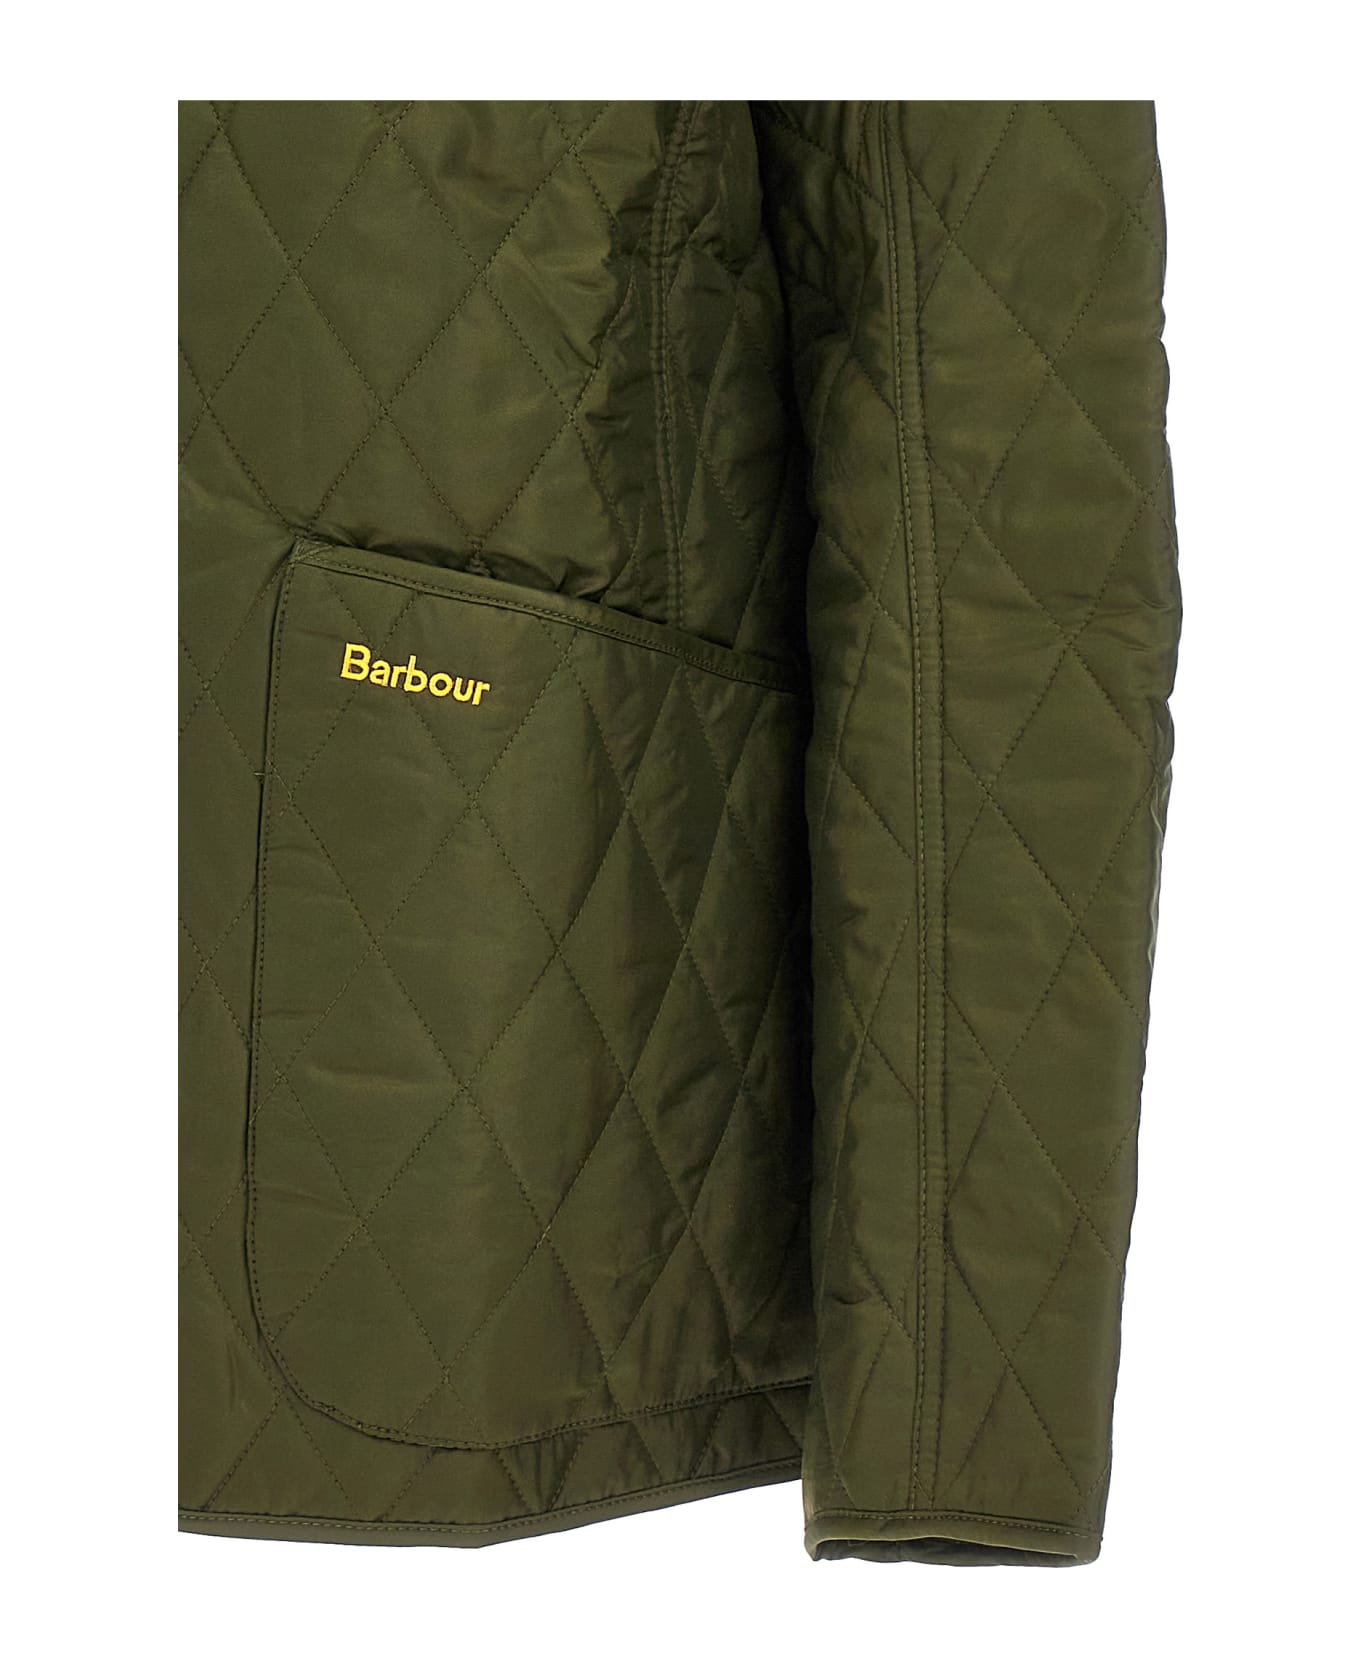 Barbour 'annandale' Jacket - Green ダウンジャケット